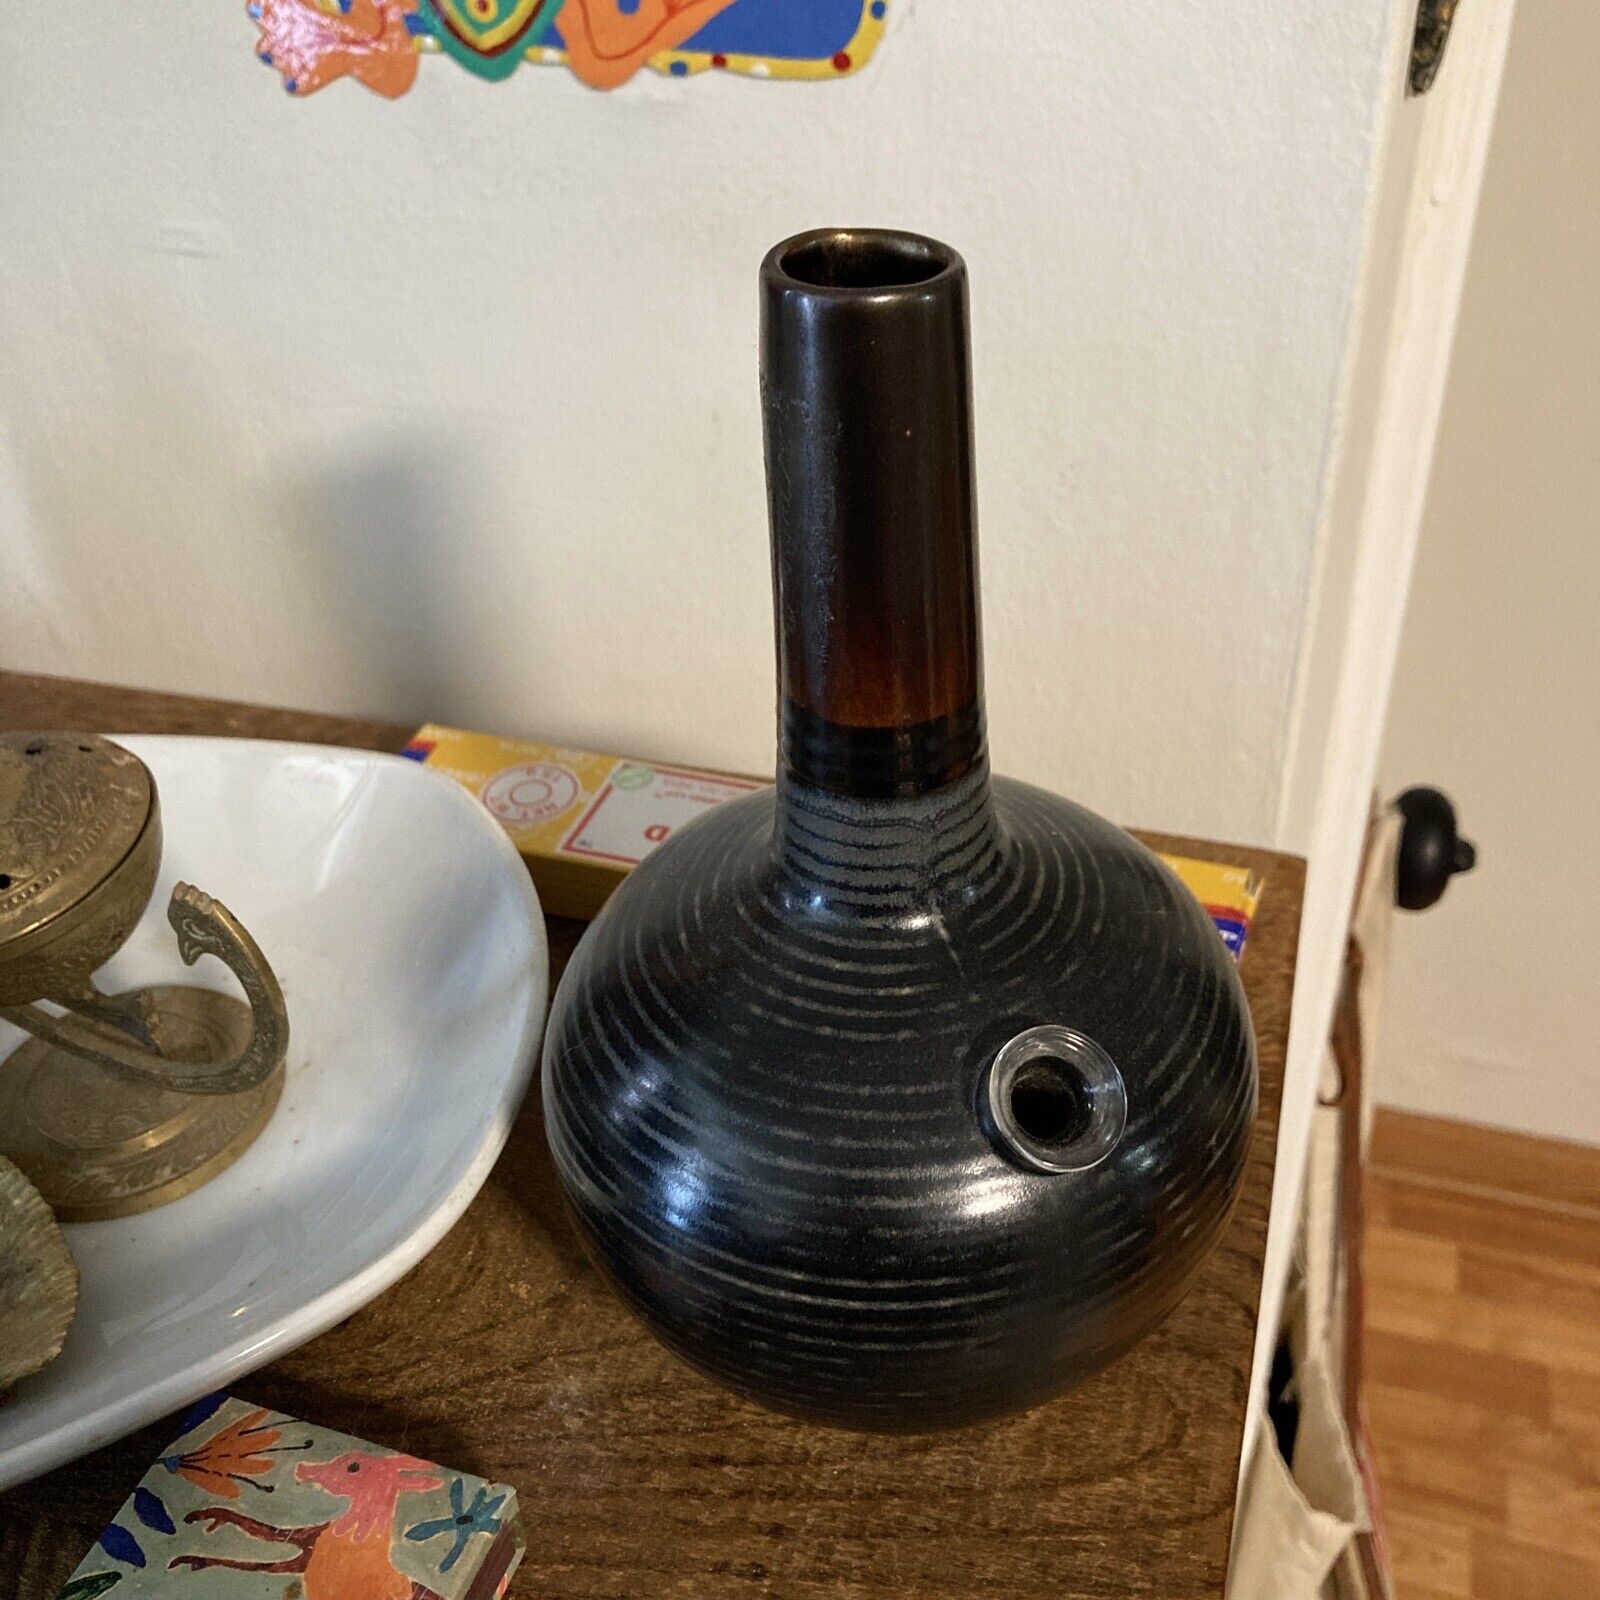 My Bud Vase Brand Water Pipe Device